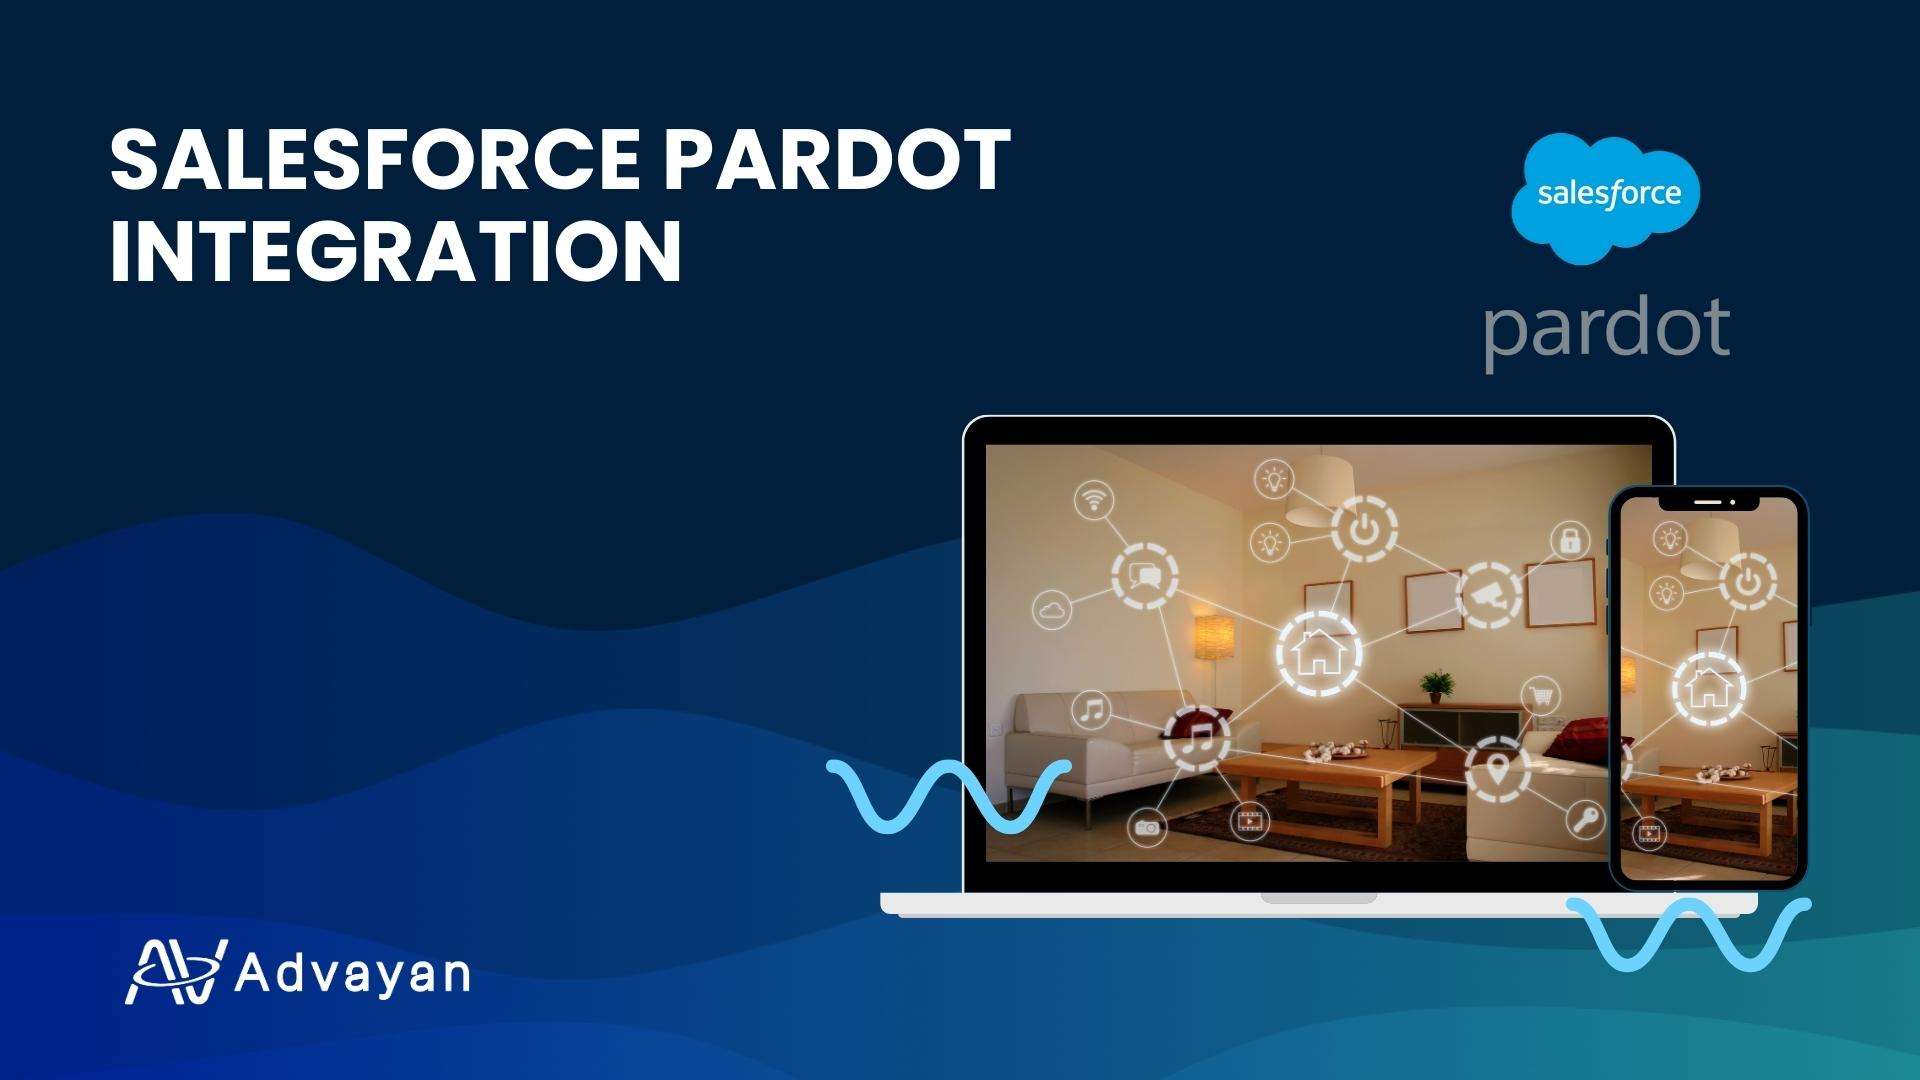 Salesforce Pardot Integration: How to Make It Work for Your Business?